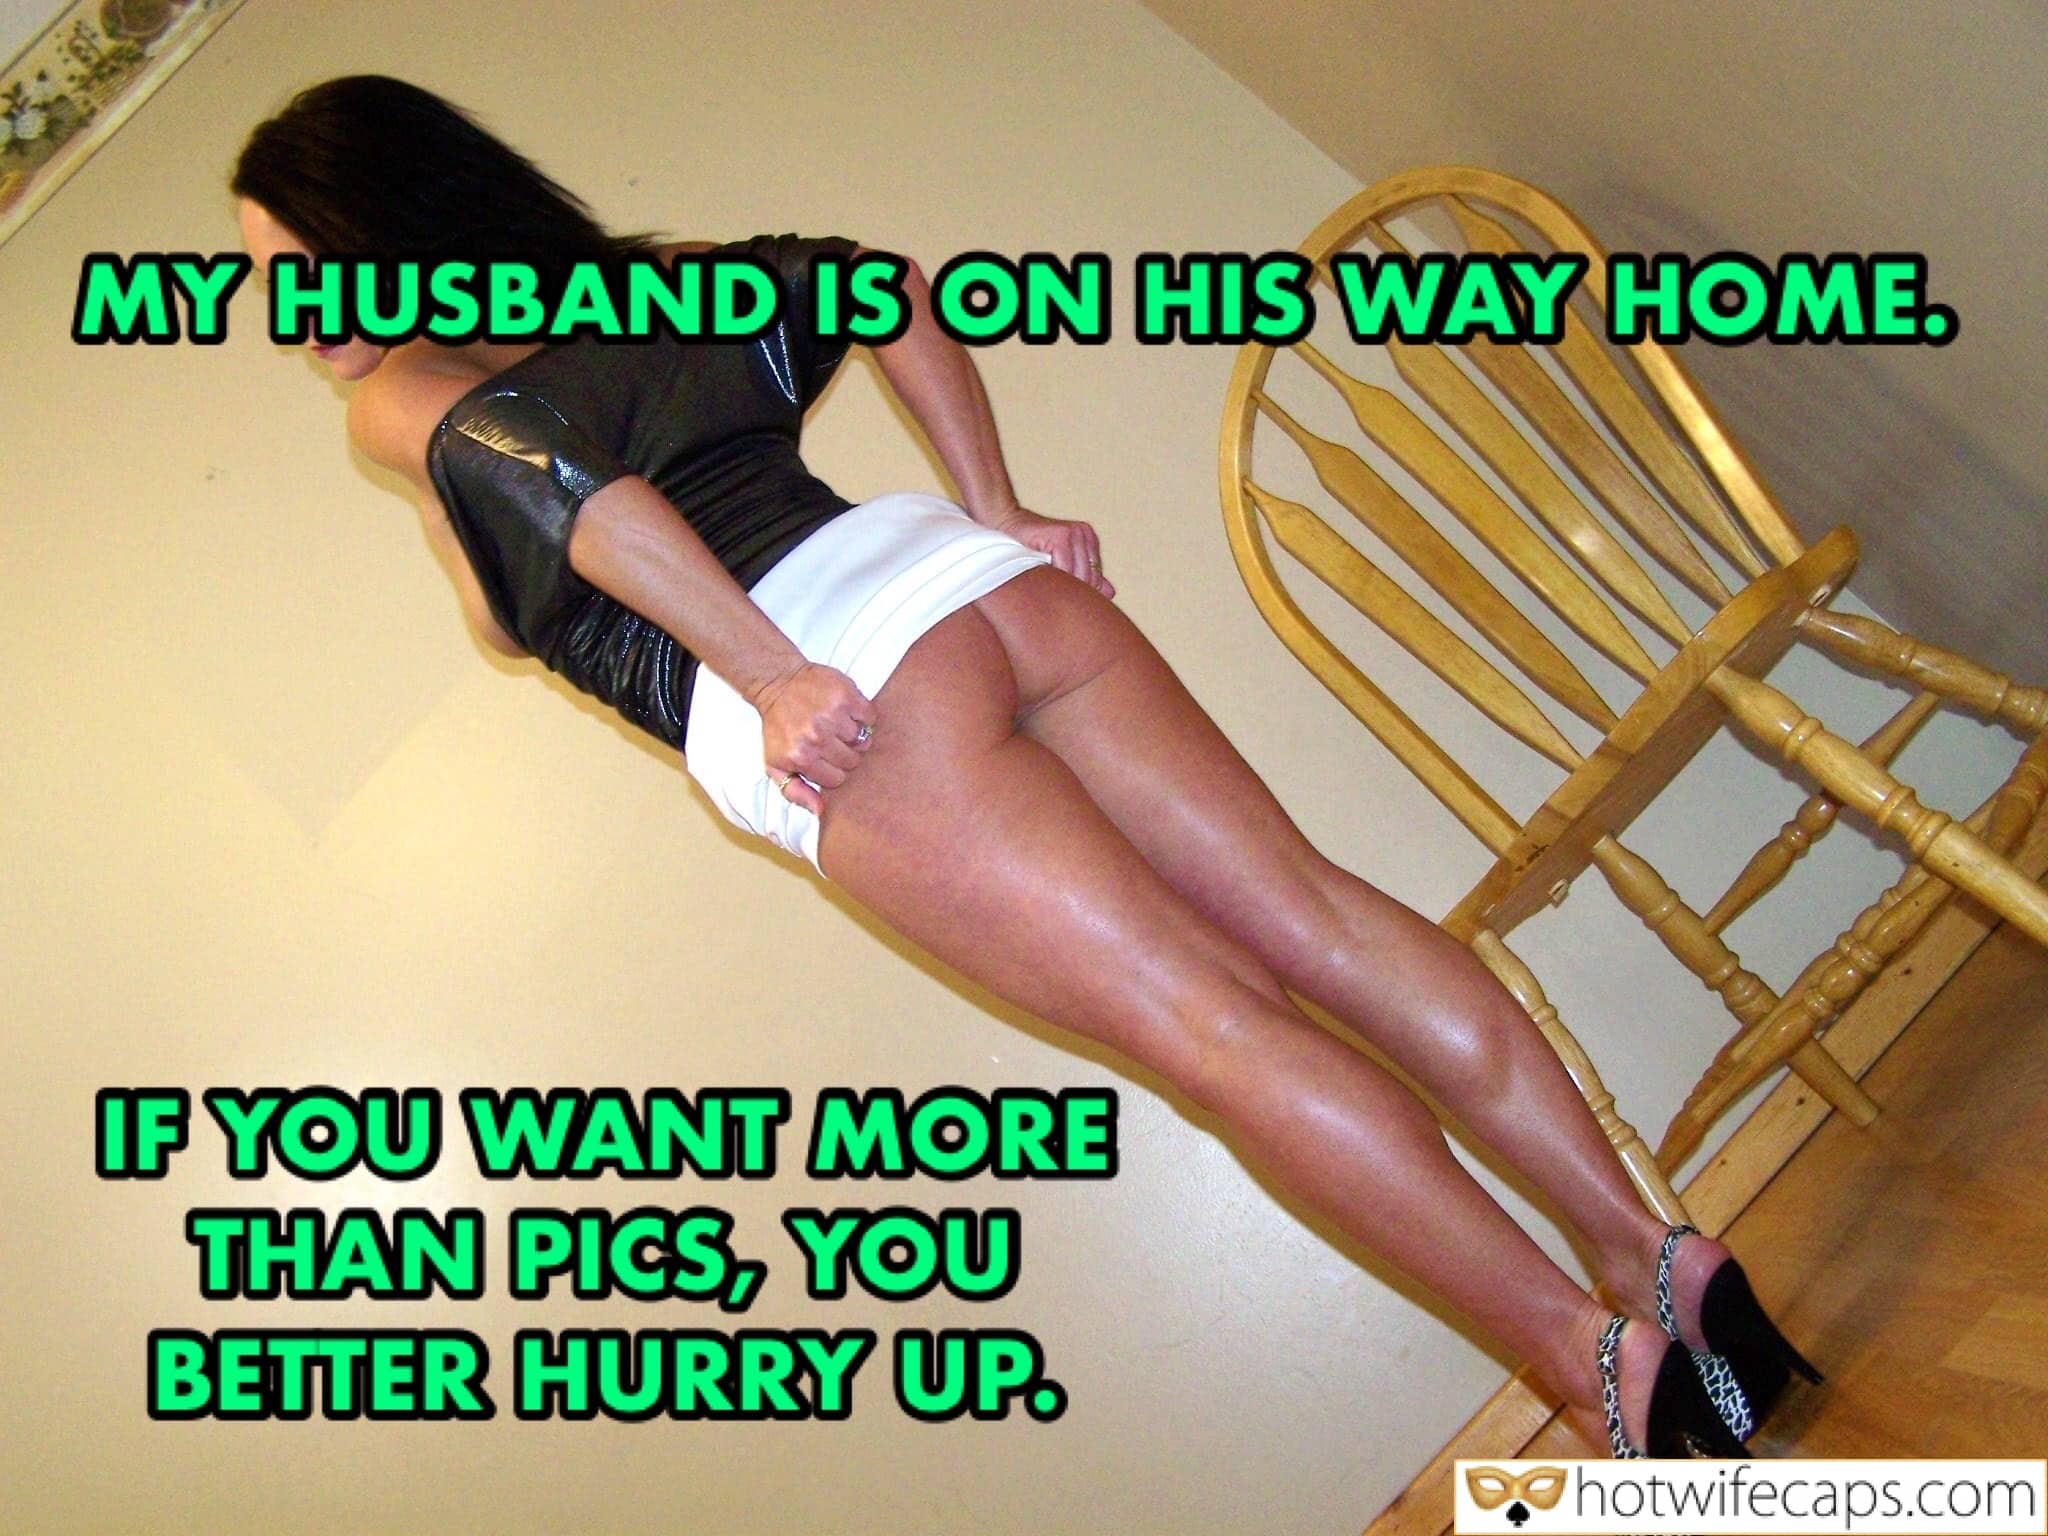 Sexy Memes Cuckquean Cheating hotwife caption: MY HUSBAND IS ON HIS WAY HOME. IF YOU WANT MORE THAN PICS, YOU BETTER HURRY UP. CD7C058A 22AA 429B BF82 B0BFB21E3B5F